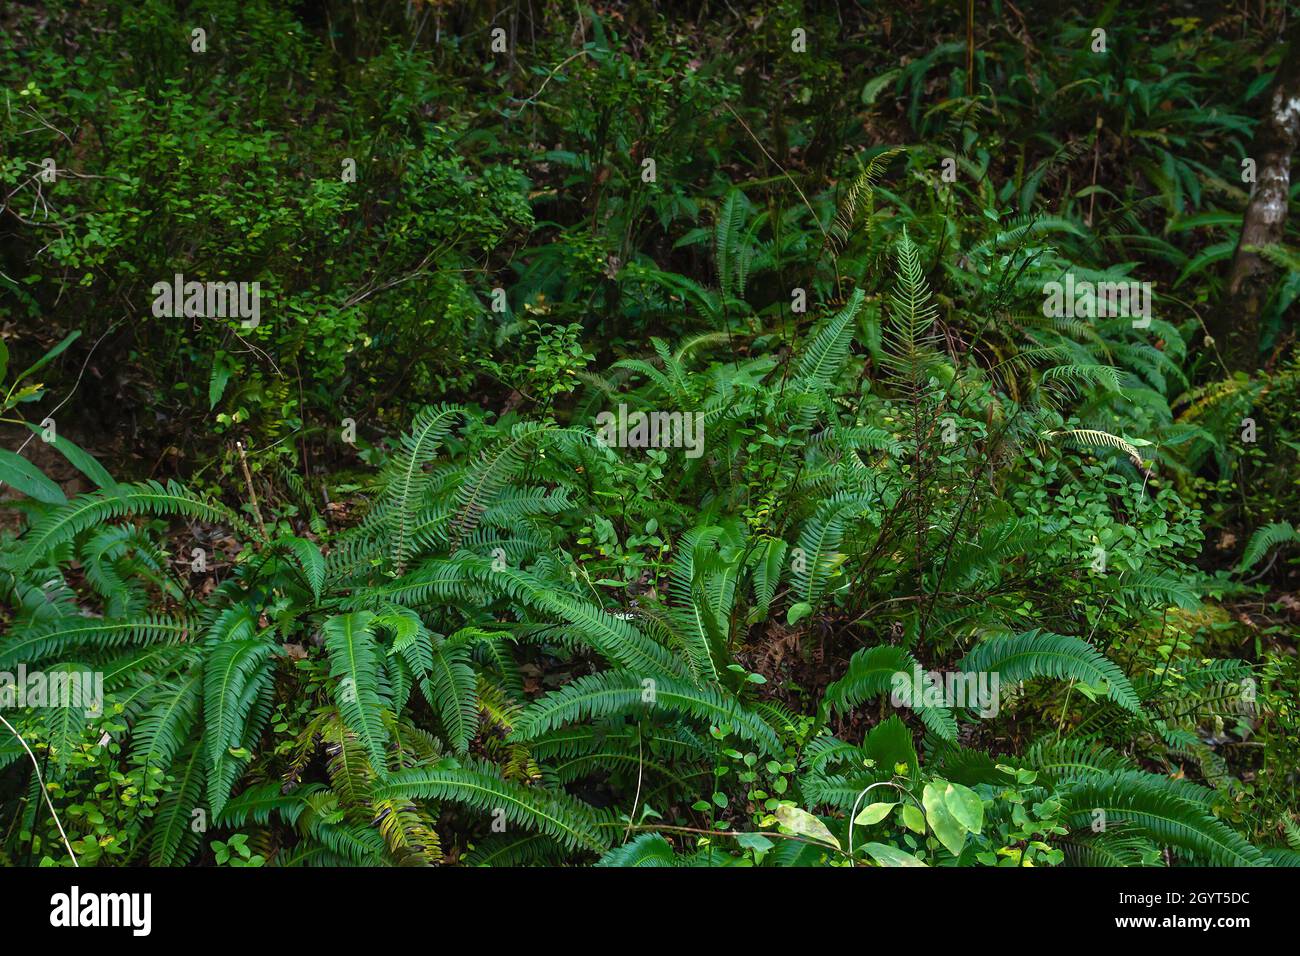 Green fern fronds and wild greenery in temperate broadleaf and mixed forests Stock Photo